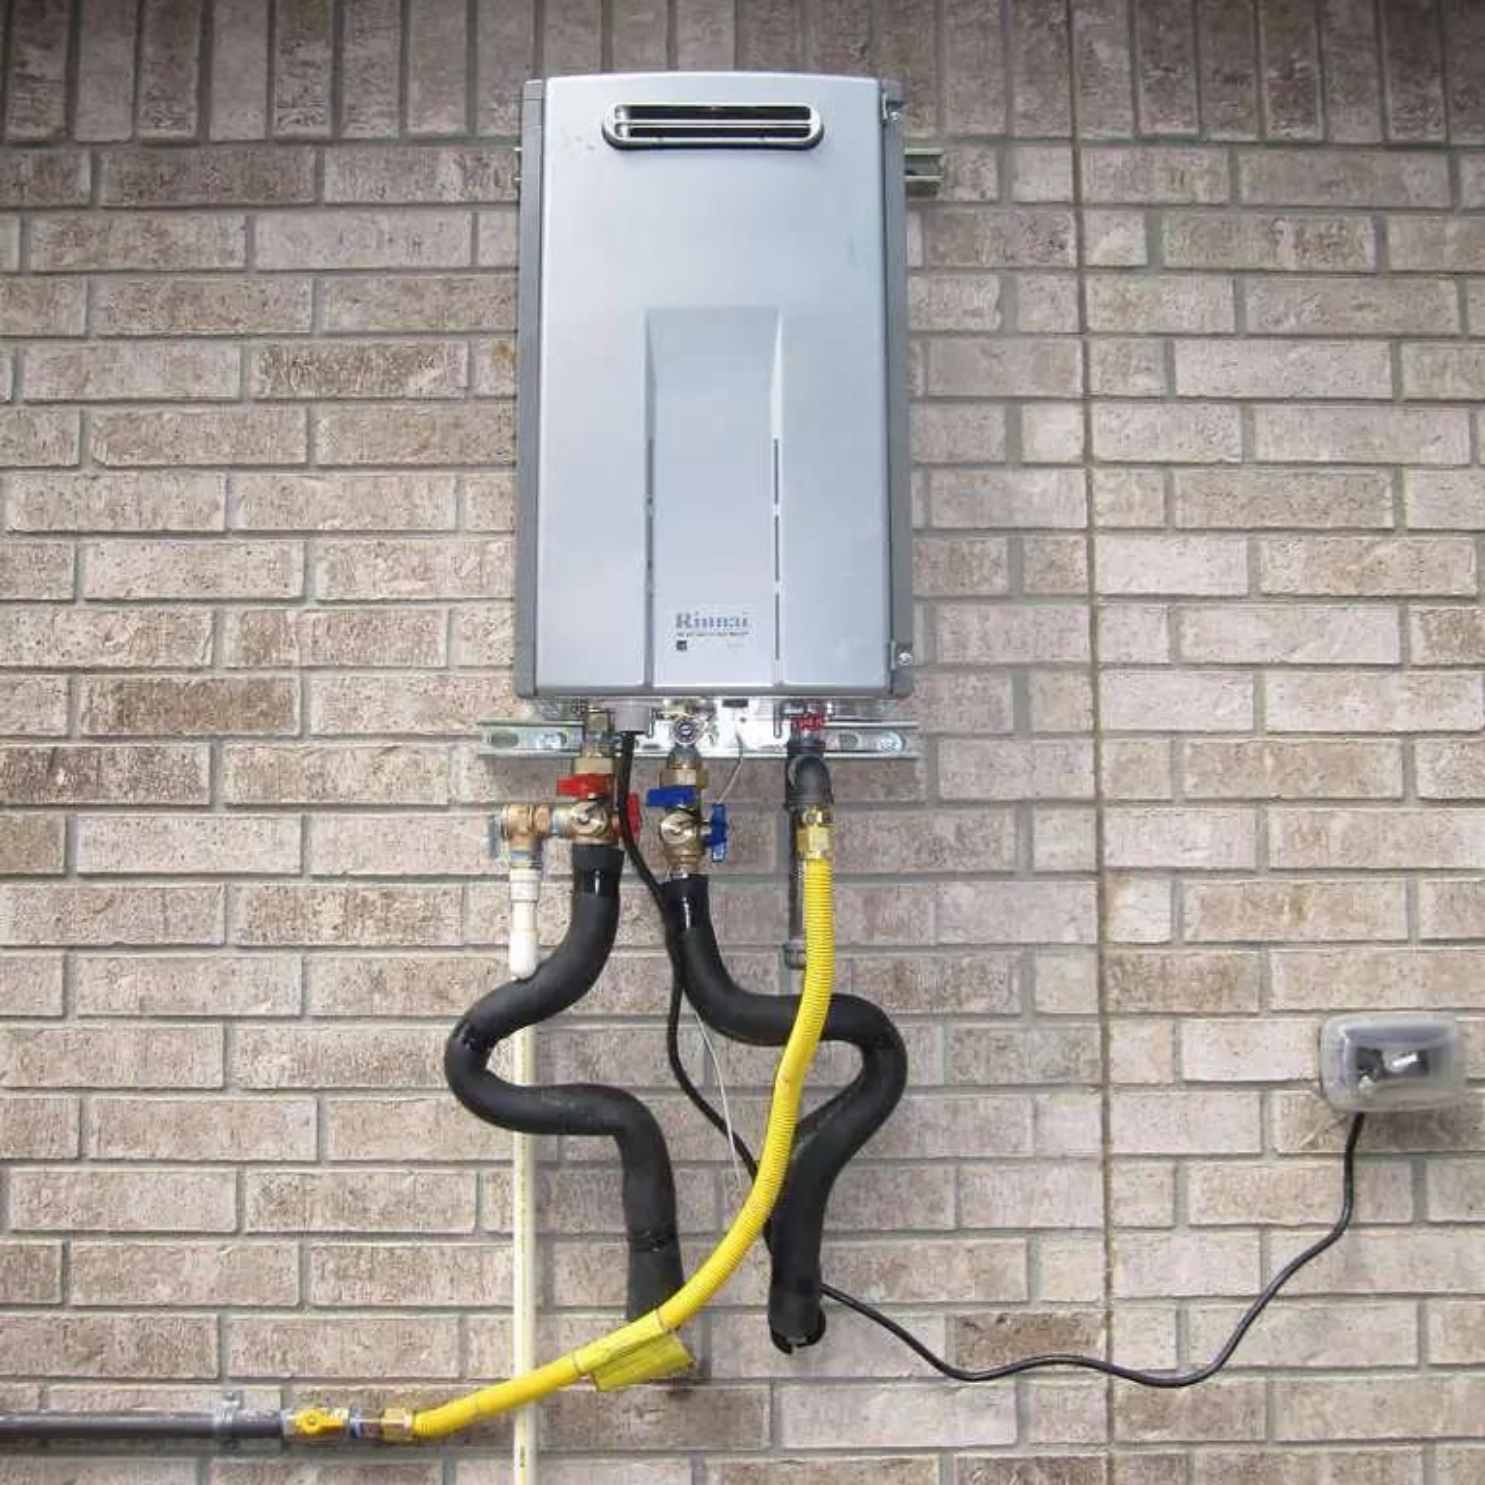 How To Install Outdoor Rinnai Tankless Water Heater